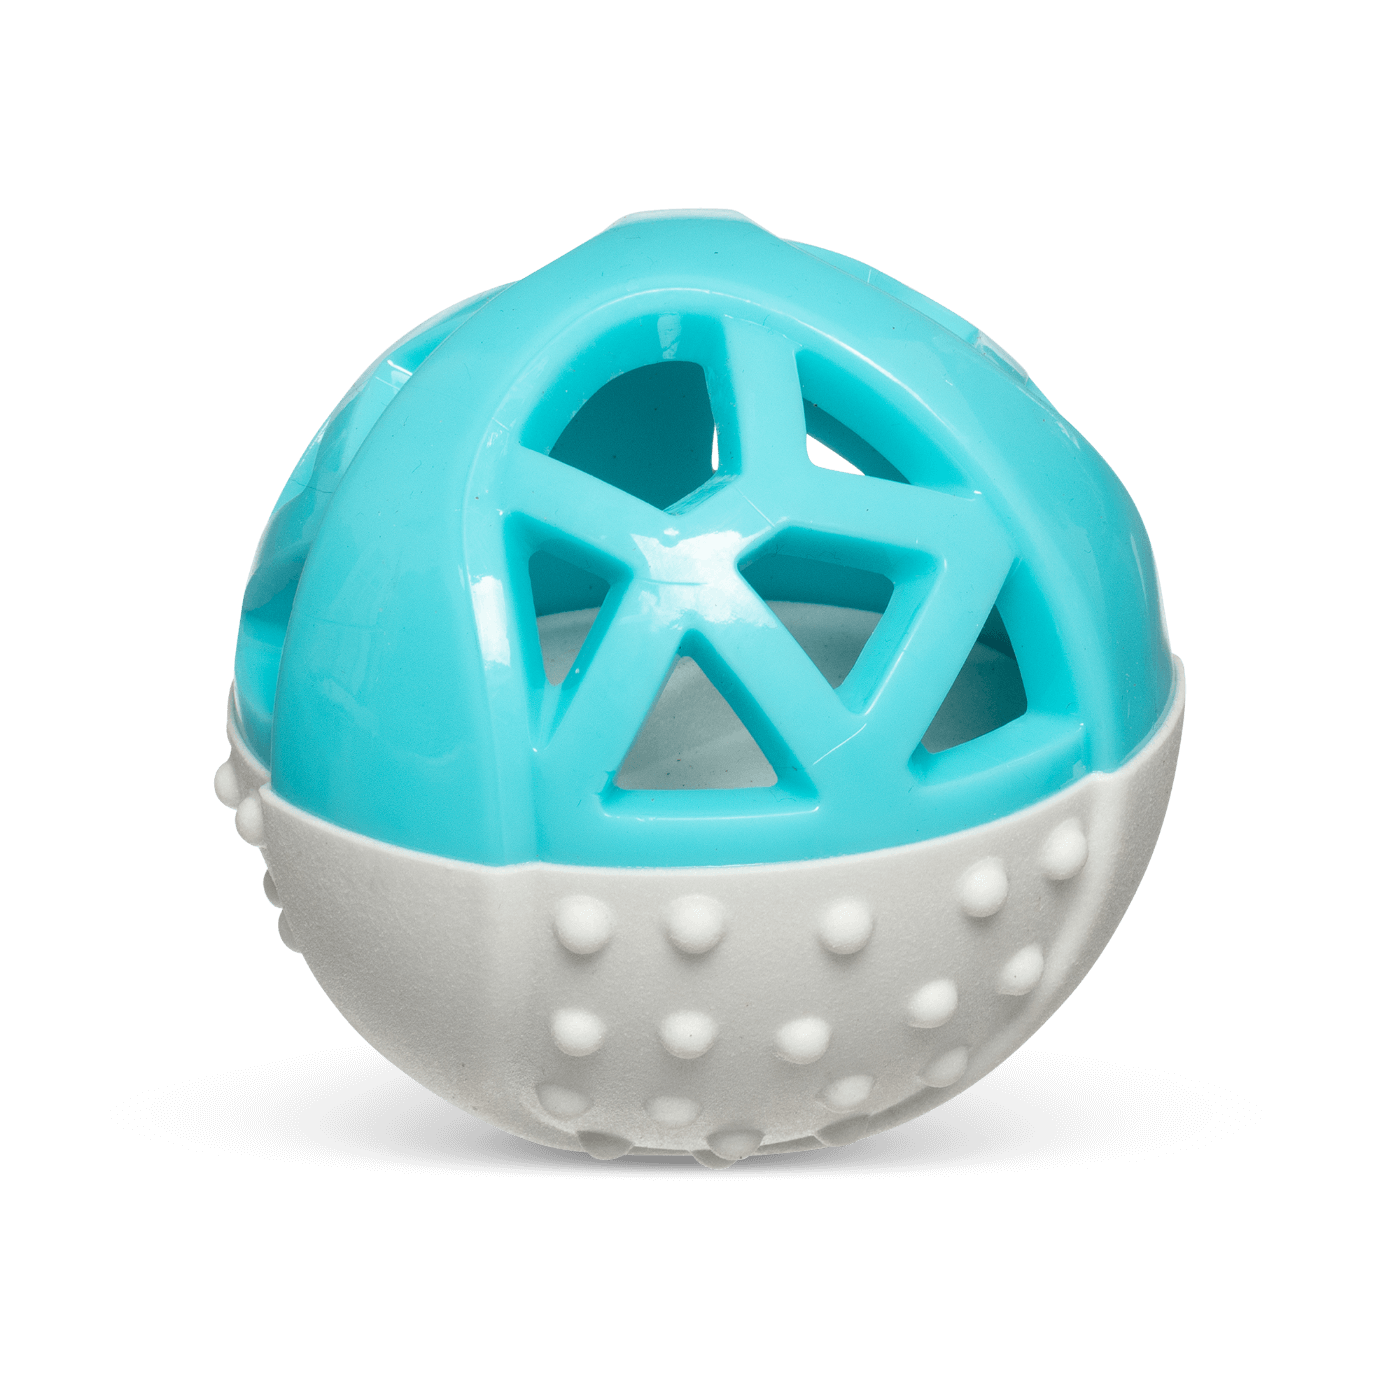 Teal and grey dog toy ball.  Built in squeaker for engaging dog play. 